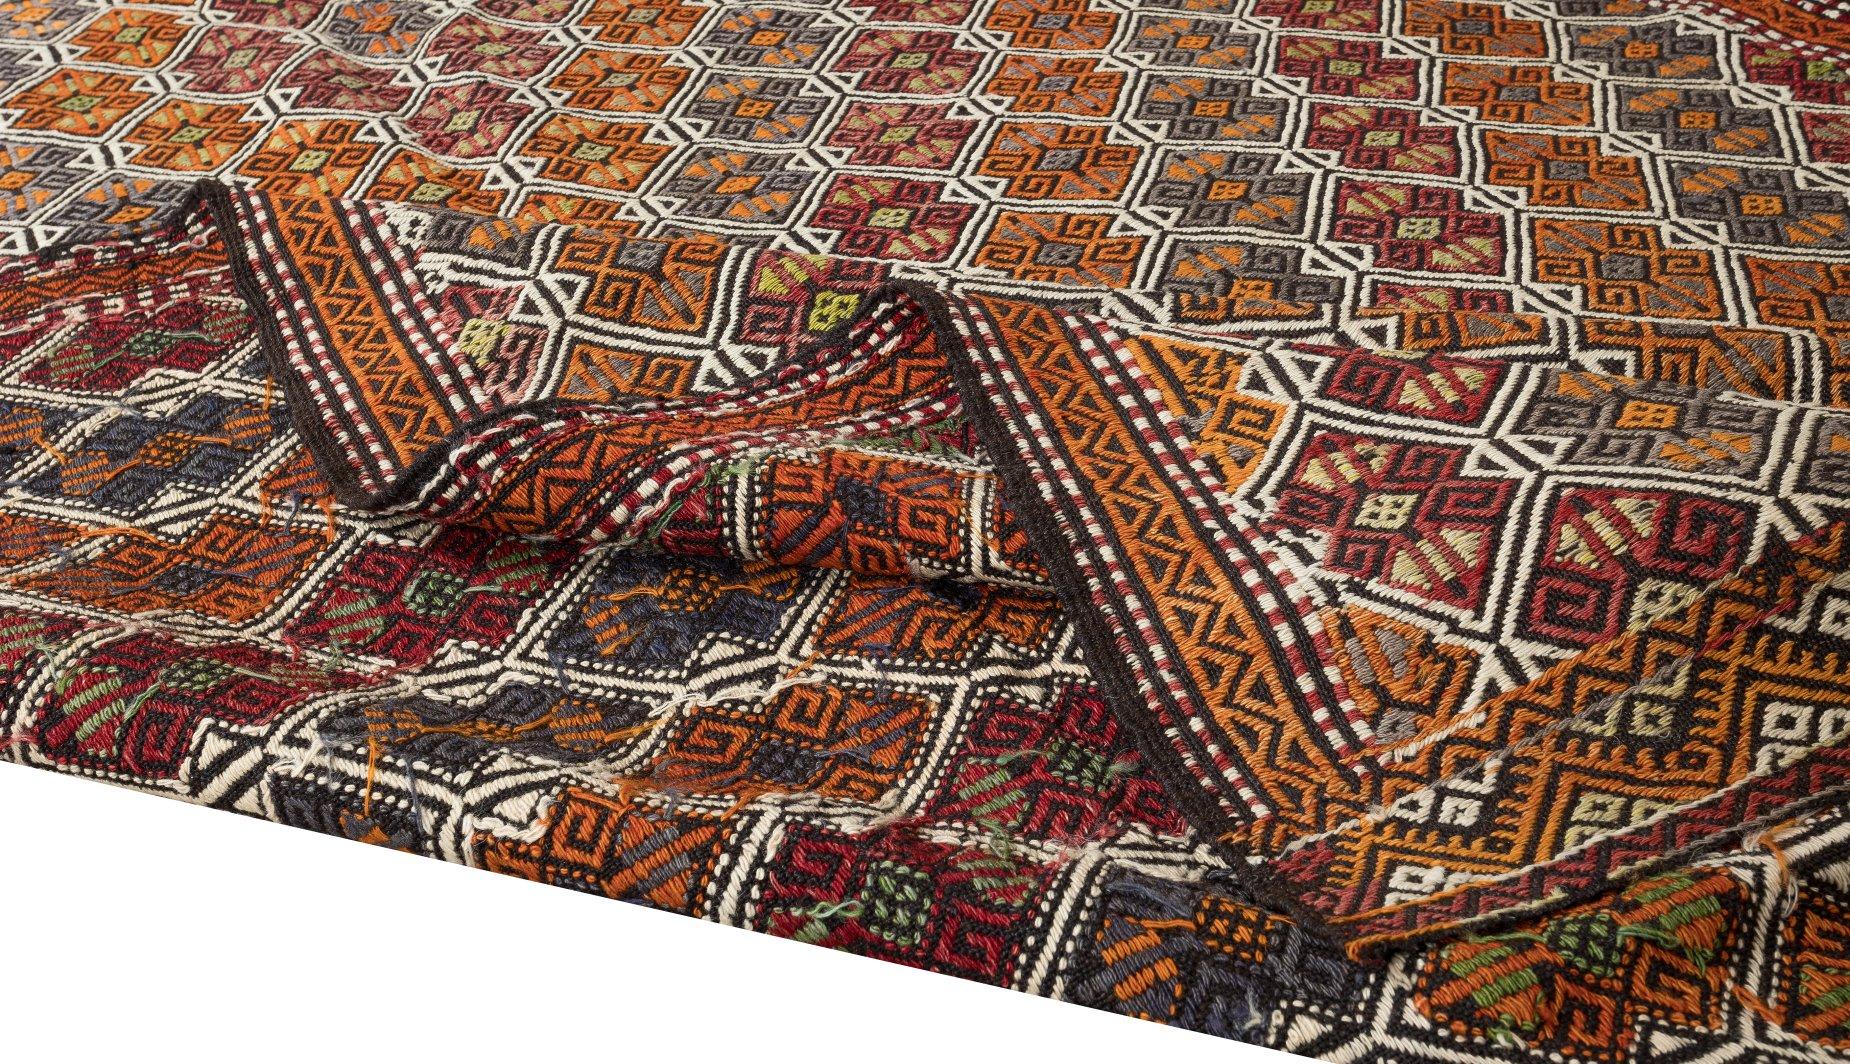 Hand-Woven 5.4x9.3 Ft Vintage Turkish Jajim Kilim, One of a Kind Handwoven Rug Made of Wool For Sale